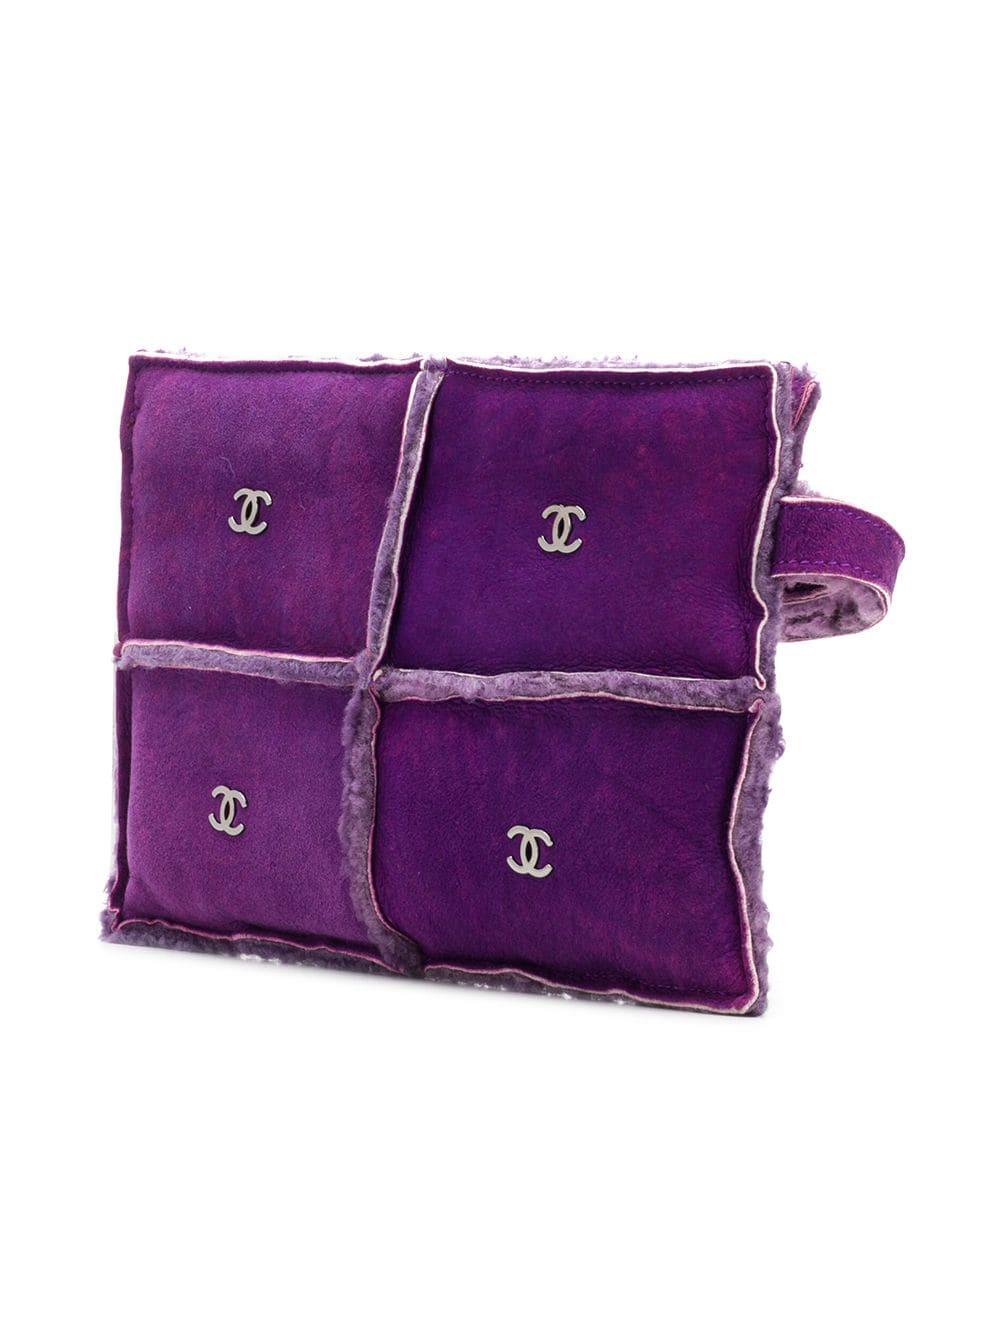 Crafted from bright purple dyed and quilted sheepskin leather with shearling fur at the seams, this stylish clutch is accented with 8 signature interlocking CC logo's in silver-tone hardware and features a looping hand strap, a top snap closure